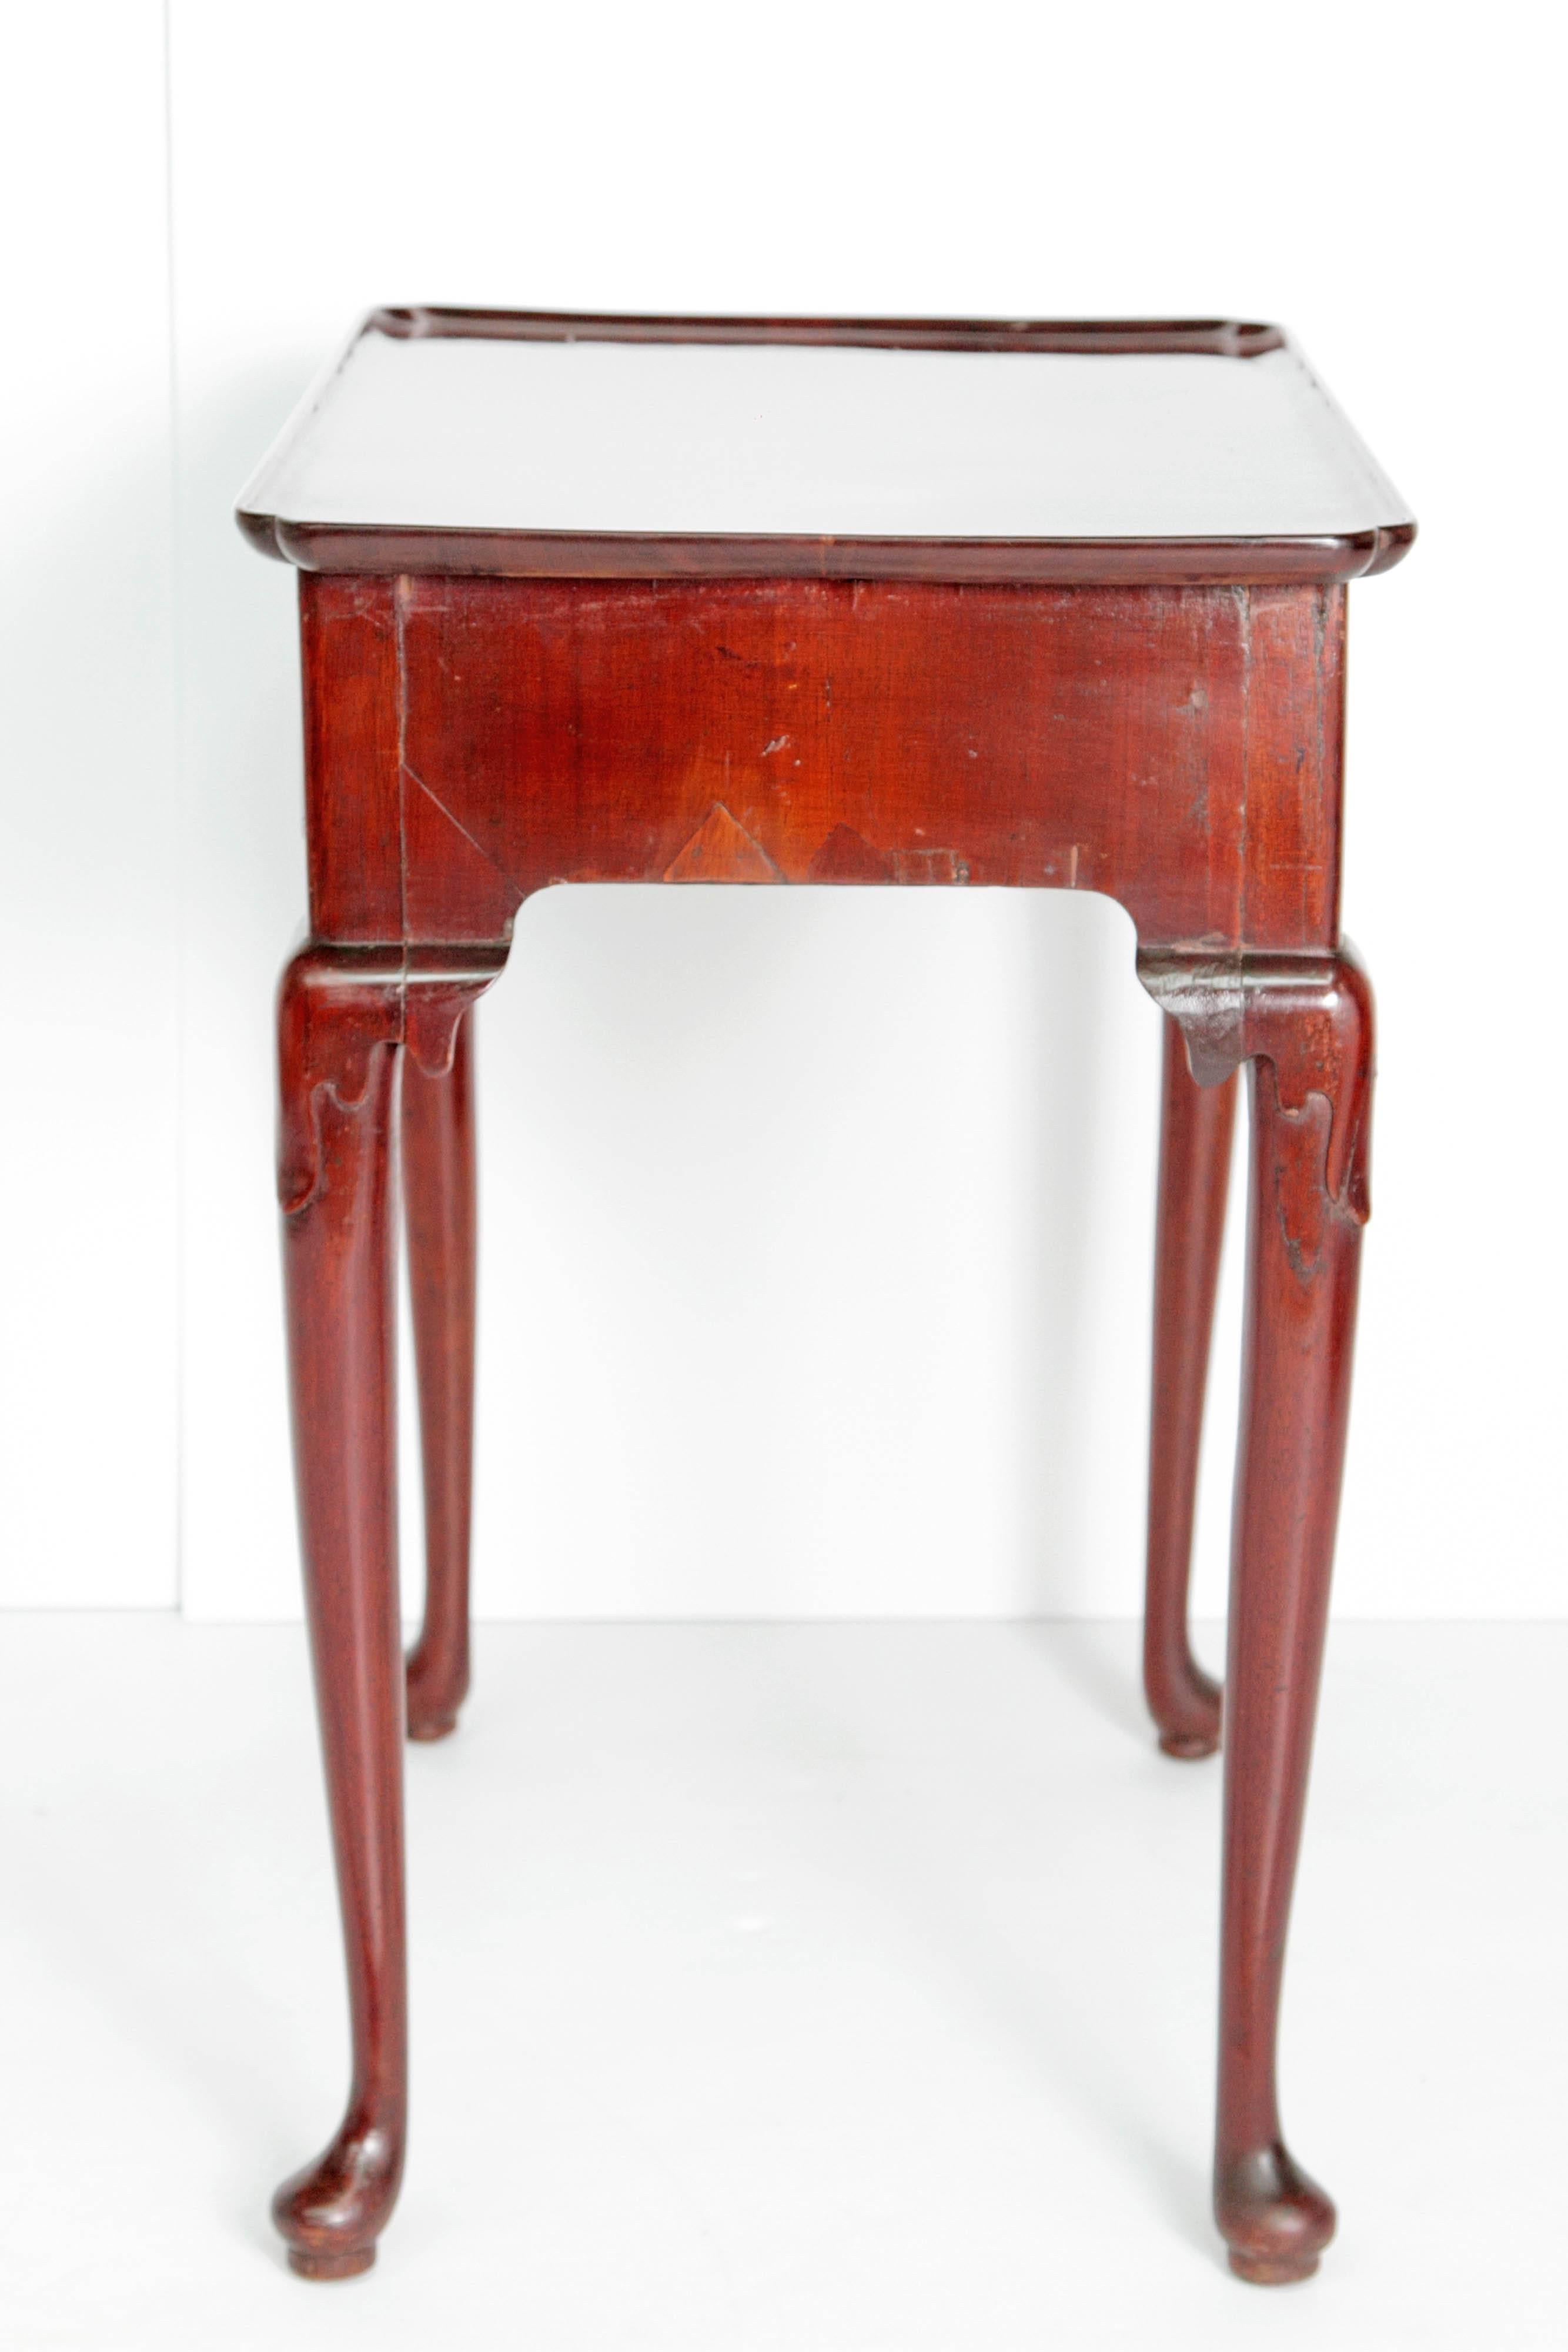 Hand-Carved 18th Century English George II Dressing Table in Walnut